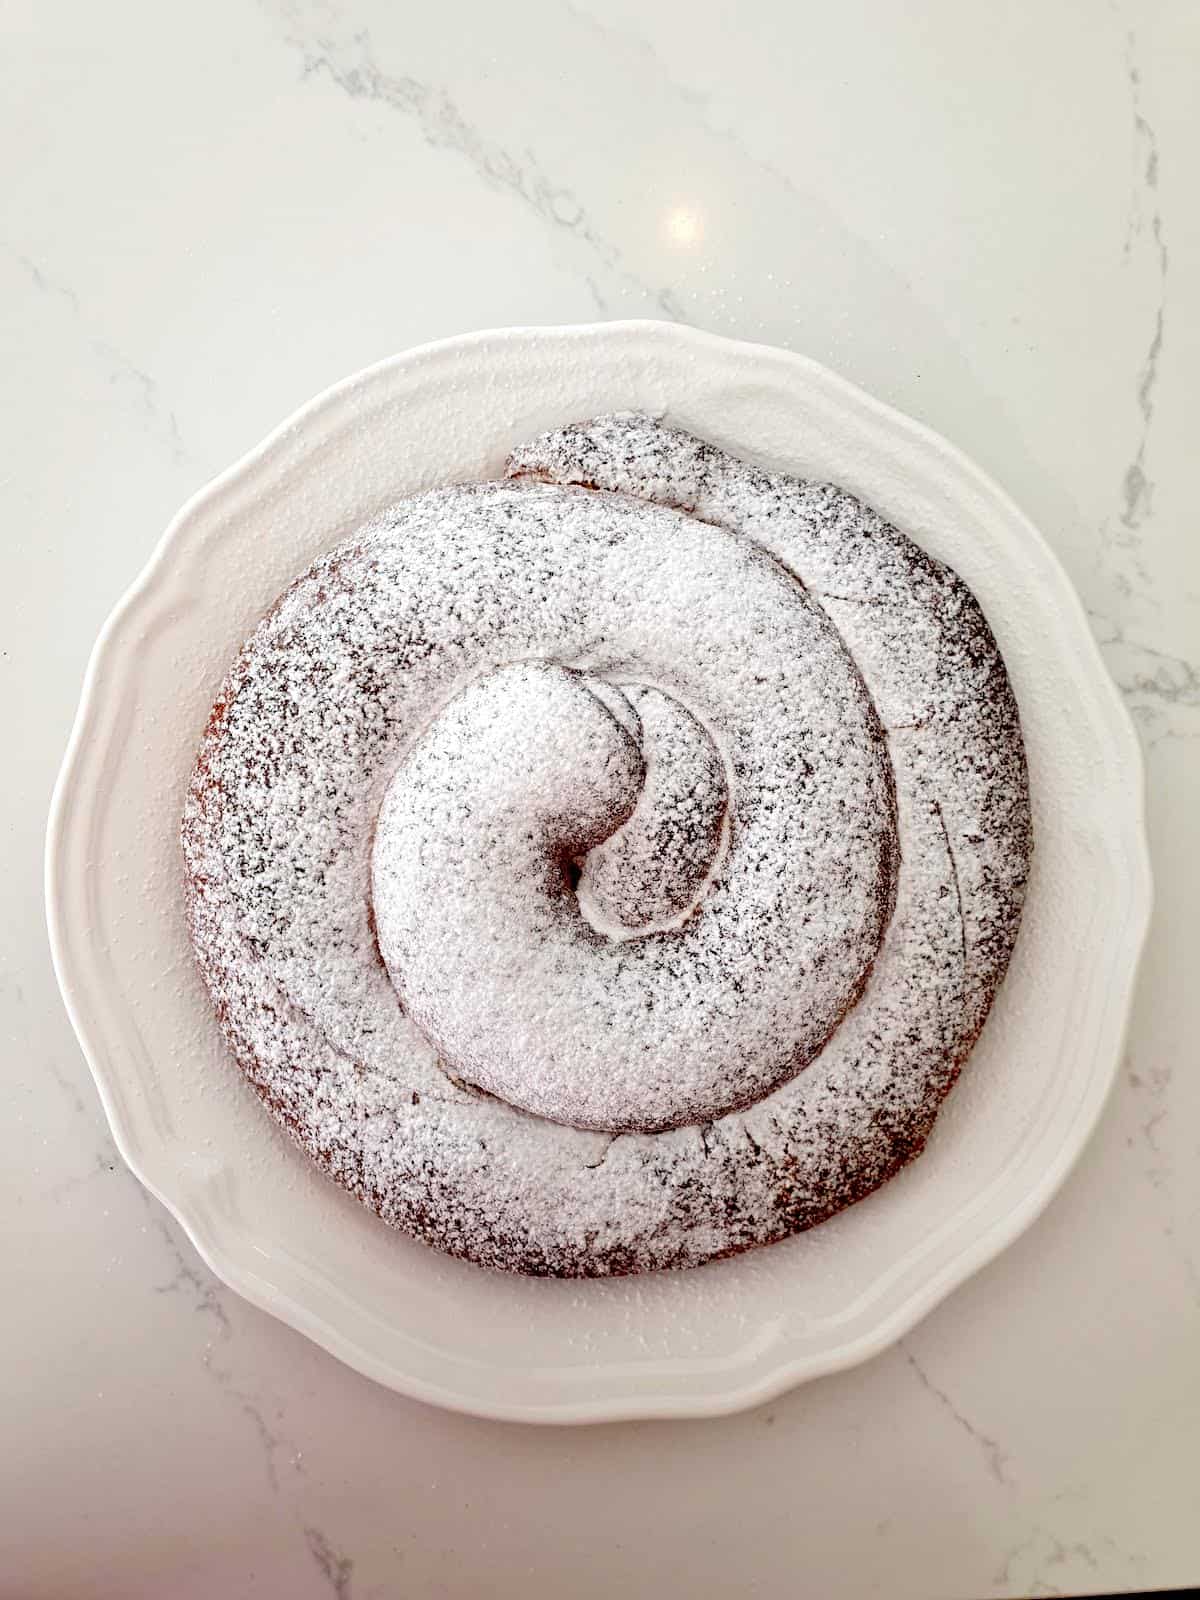 Overhead shot of a spiral-shaped pastry covered in powdered sugar.